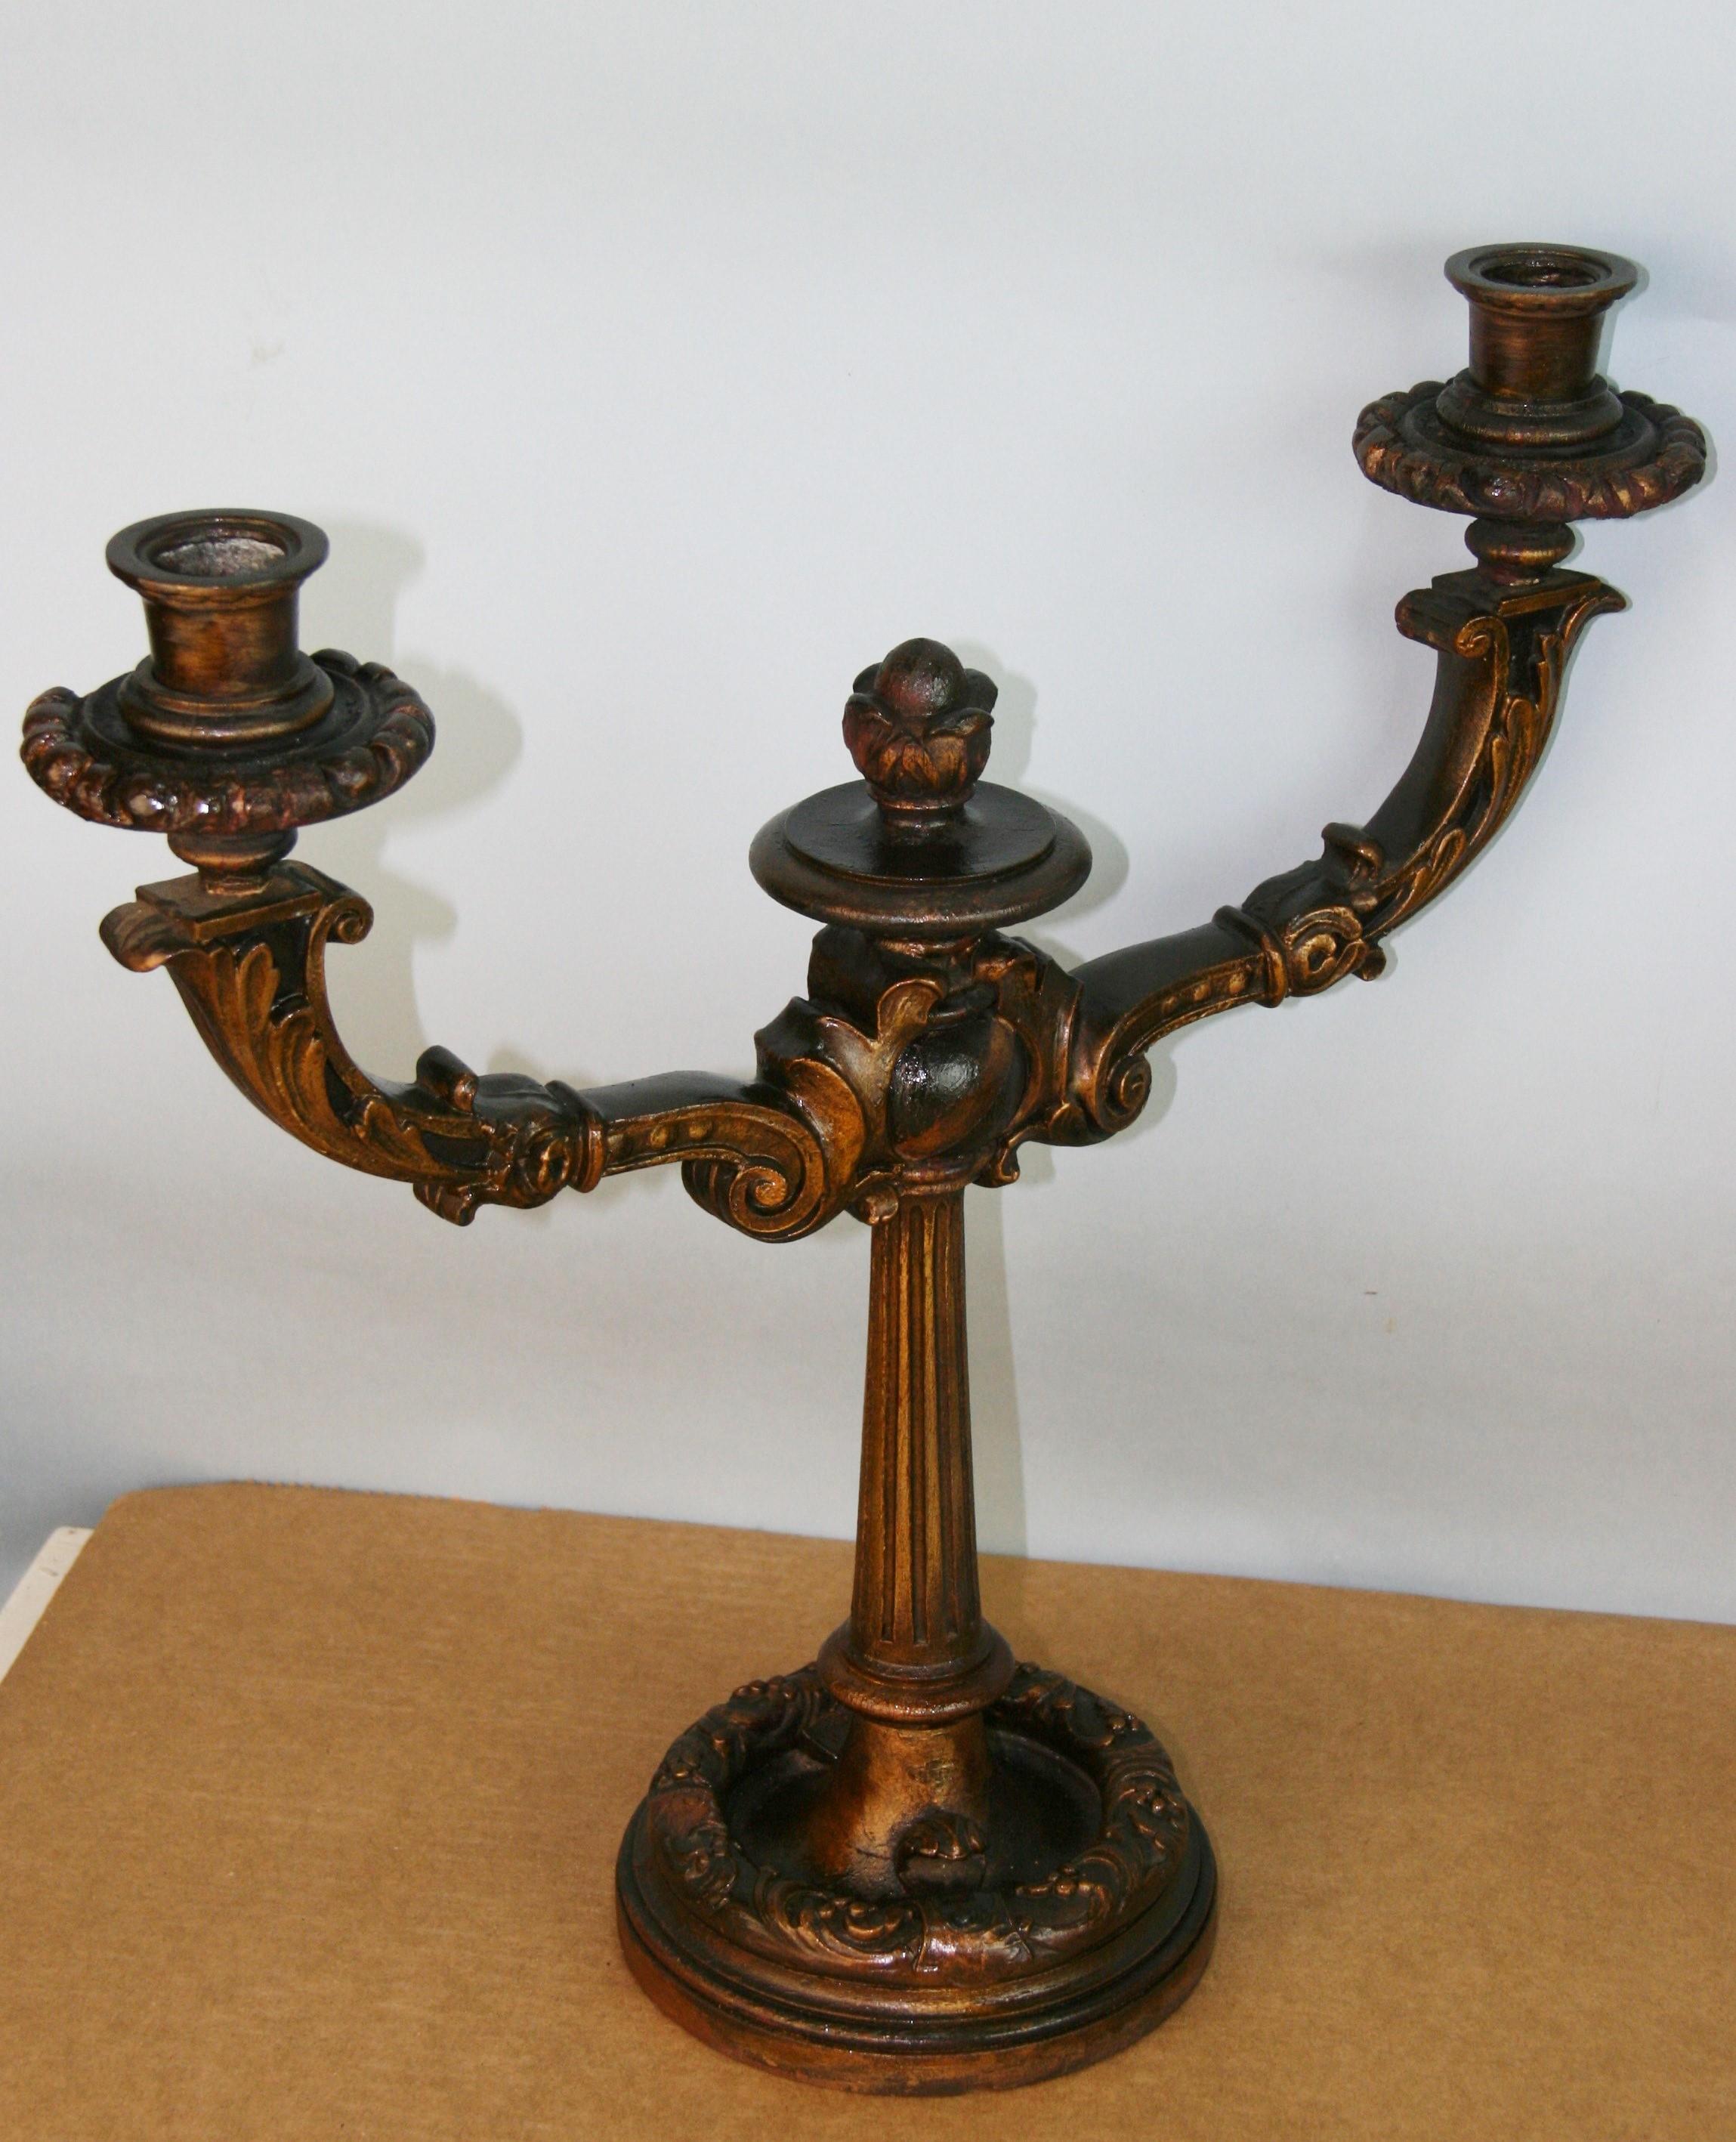 Pair of Italian Wood and Gesso Decorative Candelabras Late 19th Century For Sale 1